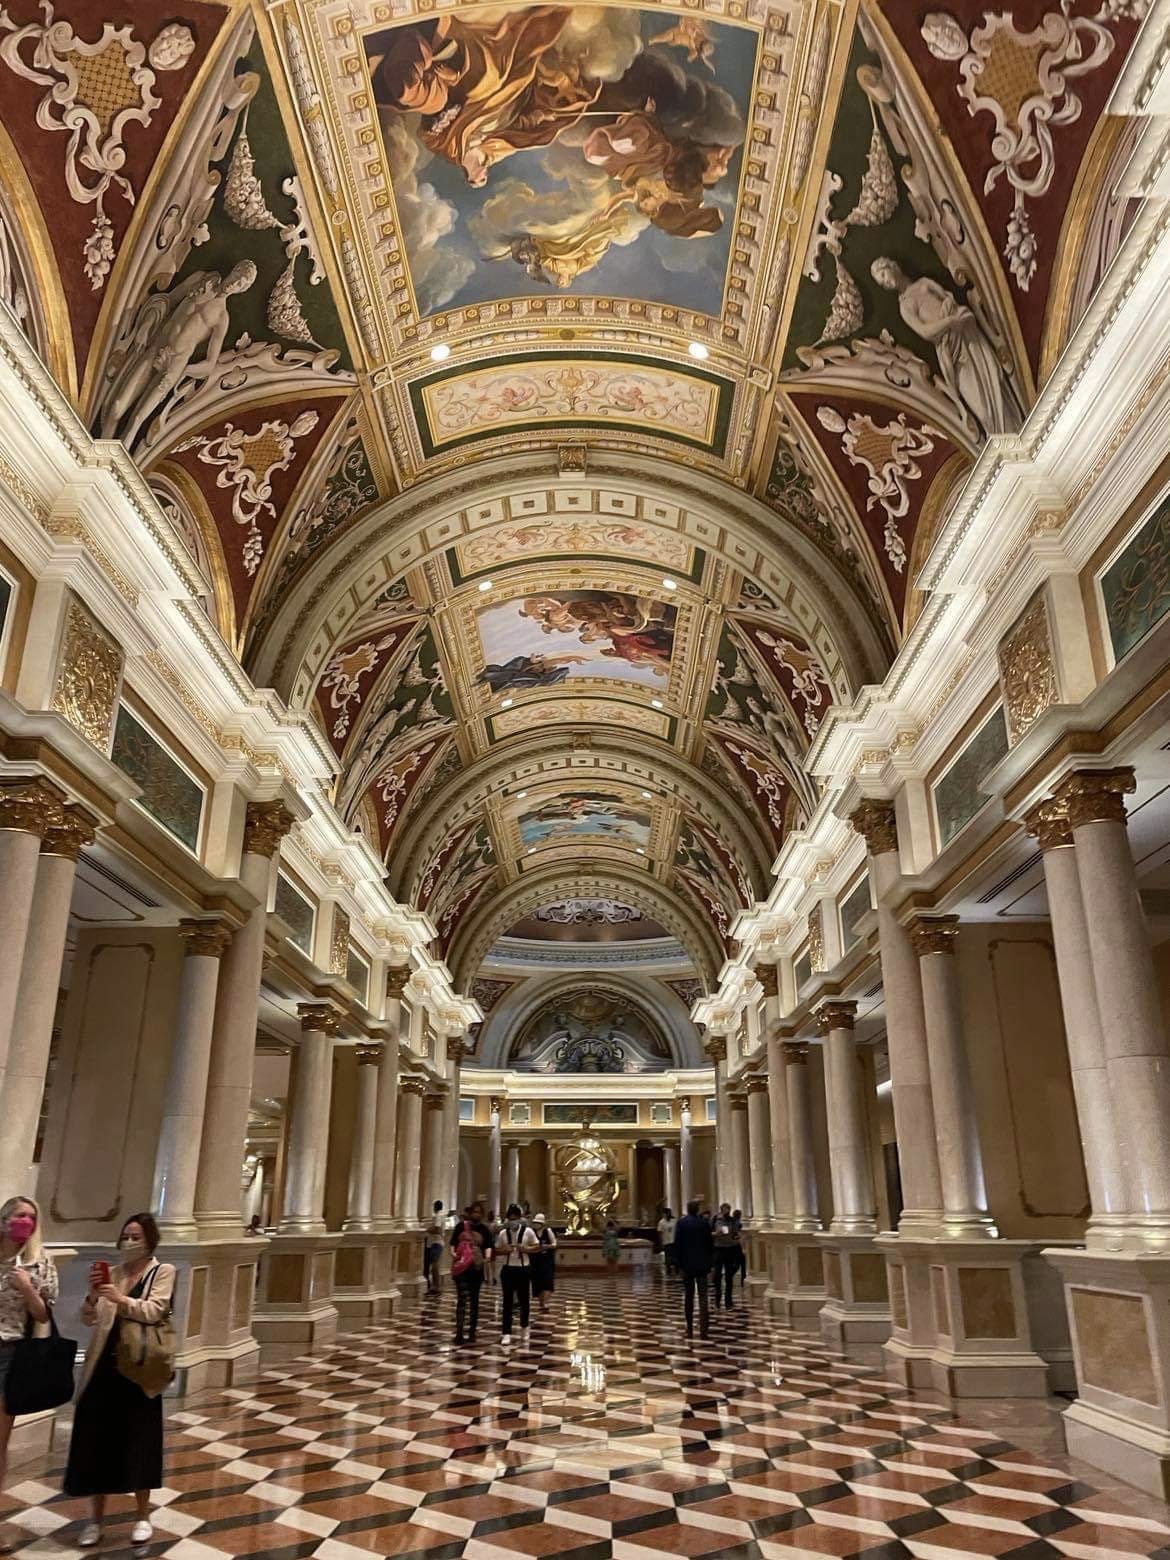 The Venetian’s lobby. Can you tell if it’s 4am or 4pm?